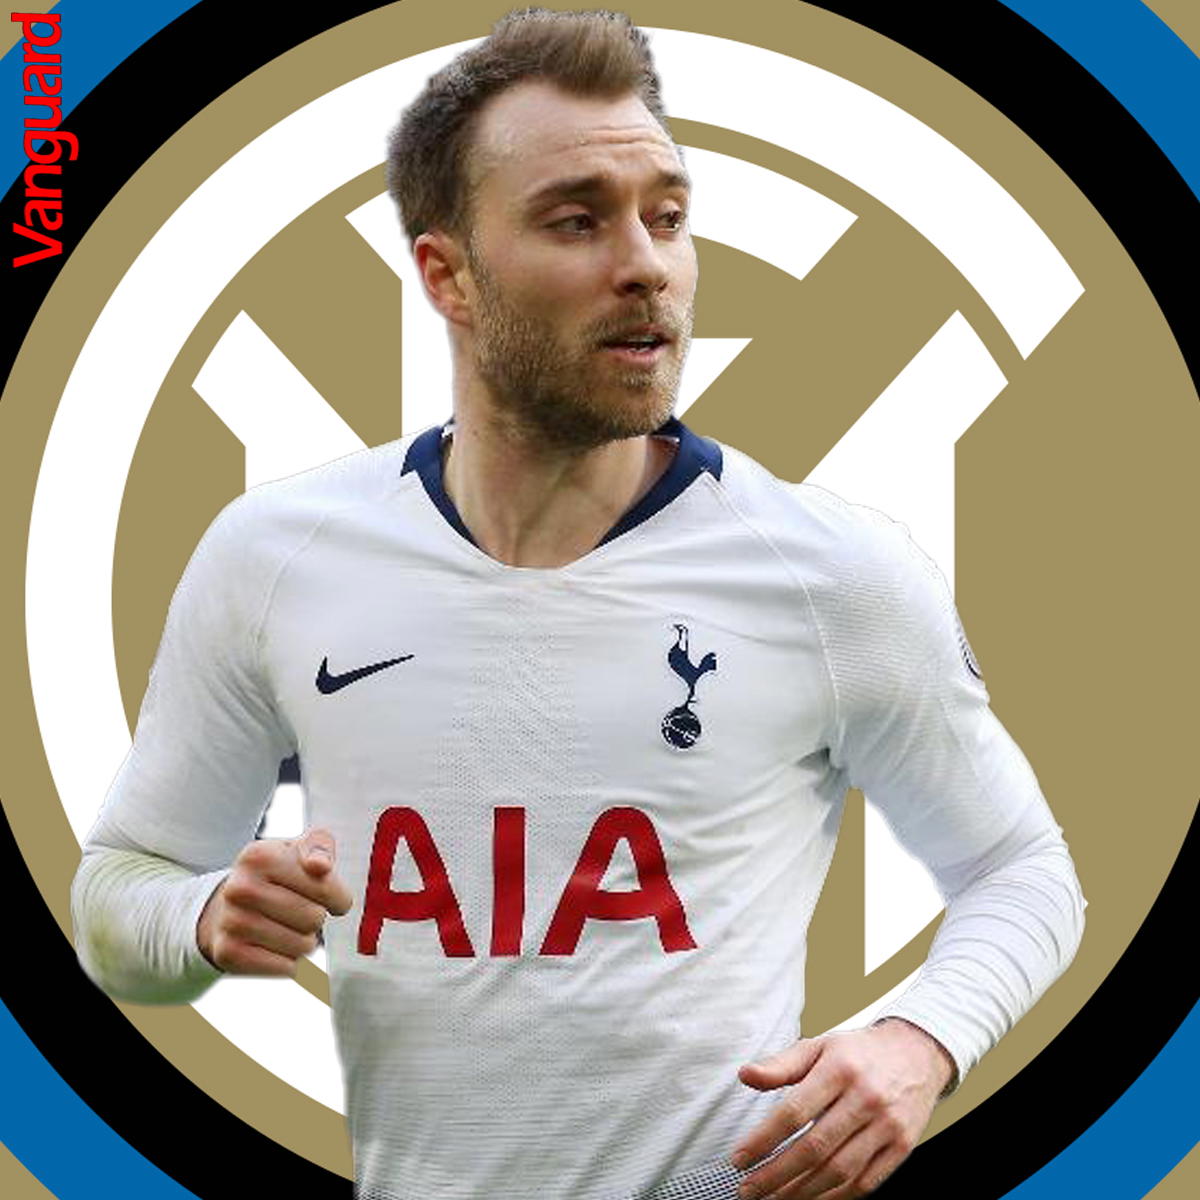 Christian Eriksen could be sold by Inter Milan as Antonio Conte